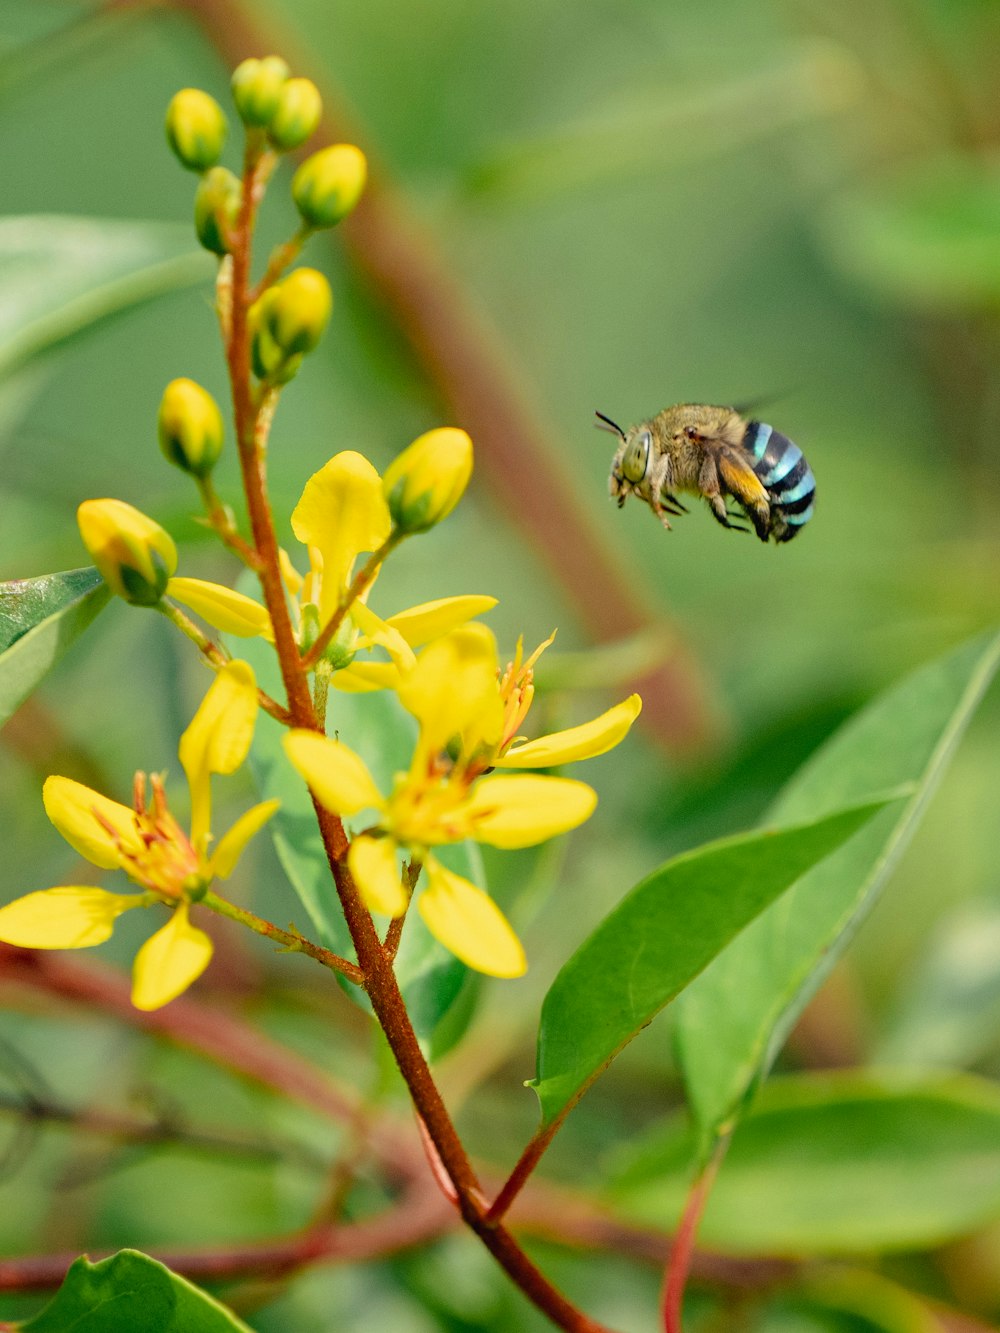 a bee flying over a yellow flower with green leaves